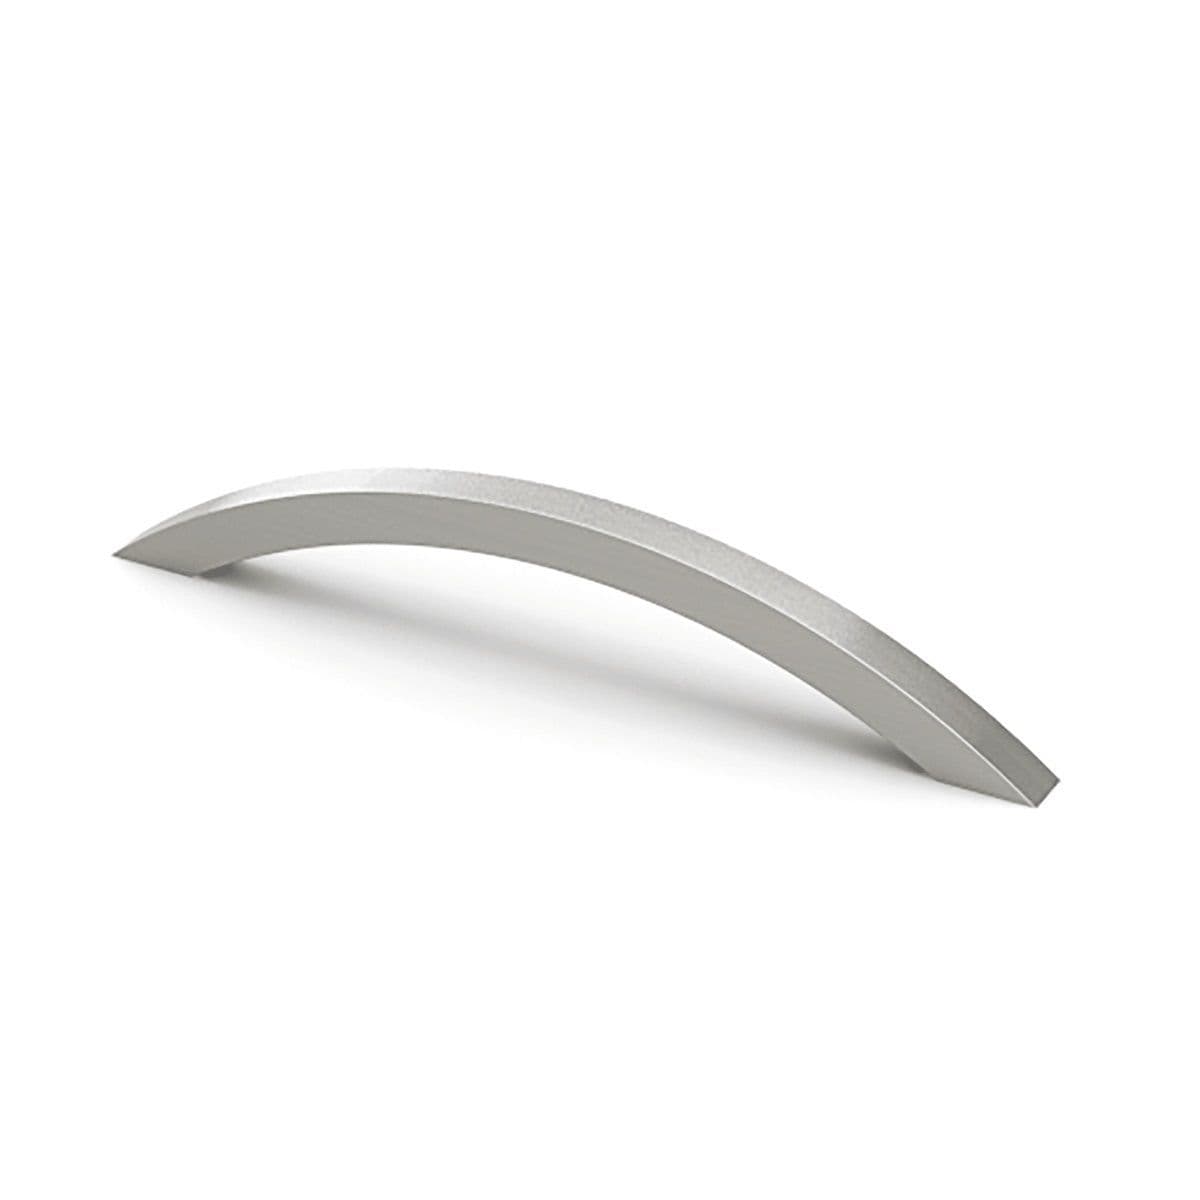 GUARANI BOW Cupboard Handle - 4 sizes - BRUSHED STAINLESS STEEL (HETTICH - New Modern)